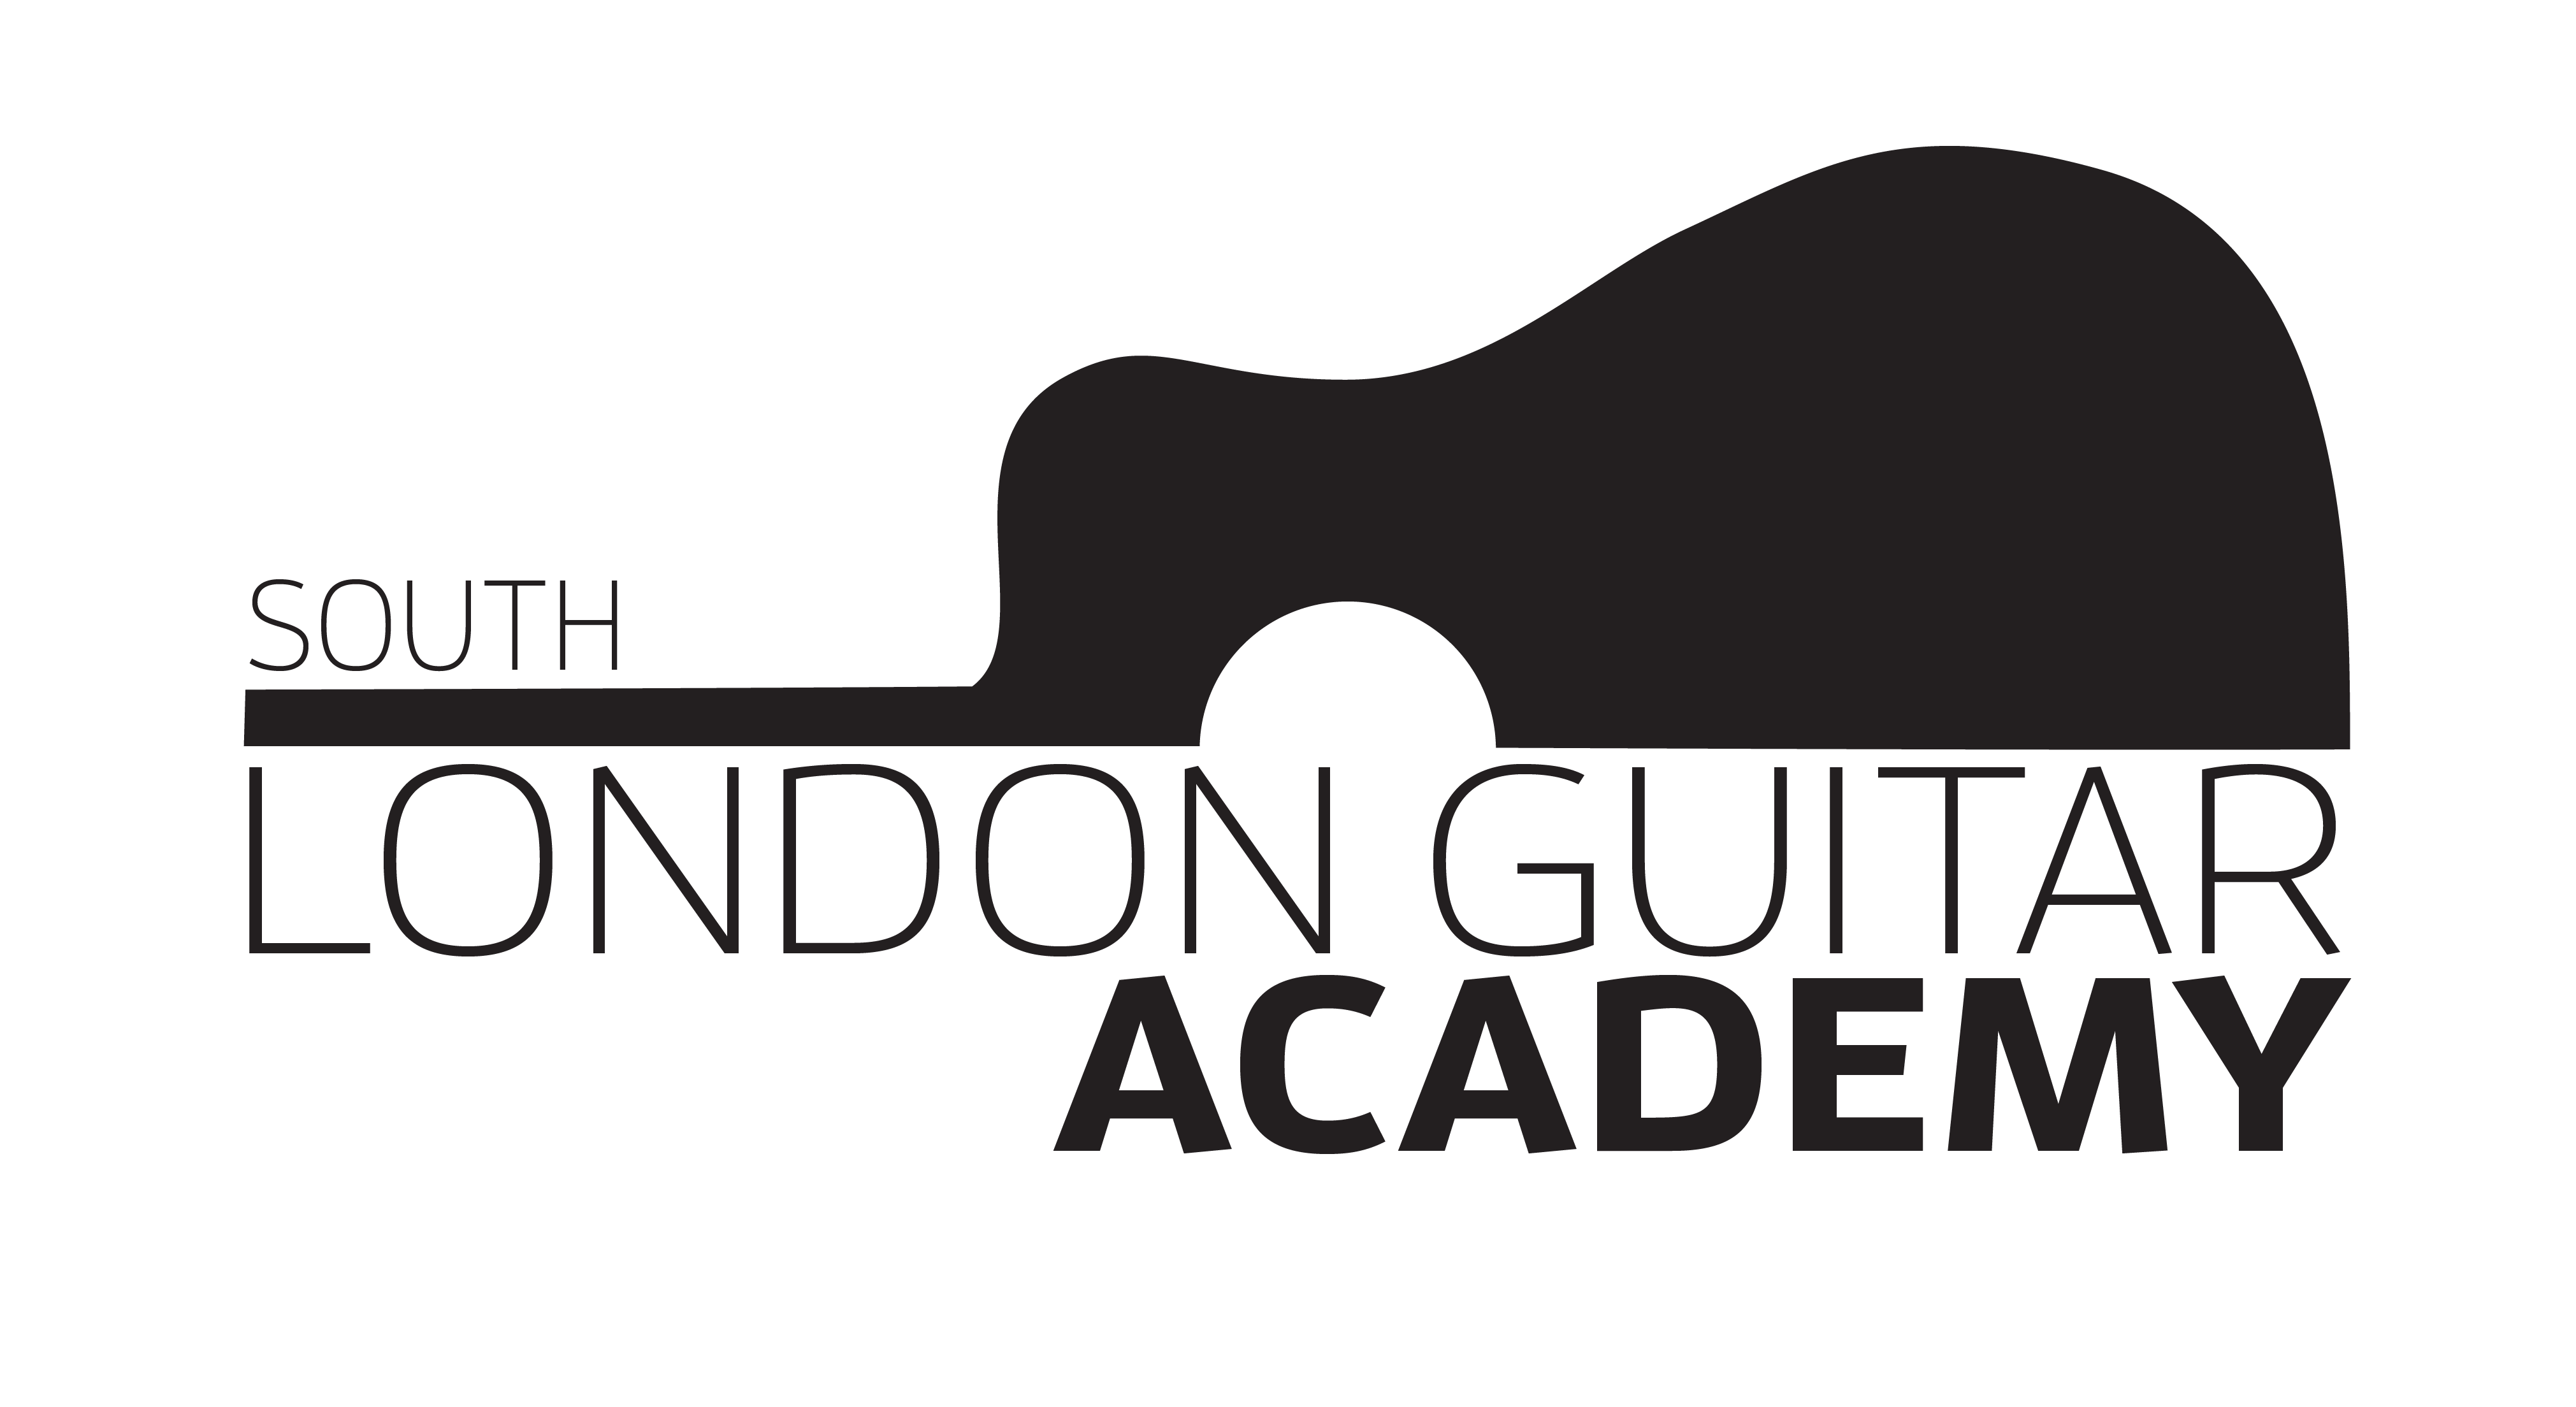 guitar lessons south west london, guitar tuition south london, guitar teacher clapham, guitar lessons battersea, guitar tuition brixton, home, guitar teacher, acoustic guitar, electric guitar, folk guitar, classical guitar, beginners guitar lessons, total beginner, intermediate guitar, advanced guitar, left handed guitar lessons, children's guitar lessons, children's guitar teacher, teenage guitar lessons, teenager, learn guitar, rock guitar, pop guitar, jazz guitar, blues guitar, indie guitar, funk guitar, rockschool, trinity guildhall, grades 1 to 8, SW1, SW2, SW4, SW8, SW9, SW11, SW12, SE11, SE24, balham, brixton, camberwell, clapham, herne hill, stockwell, streatham, tulse hill